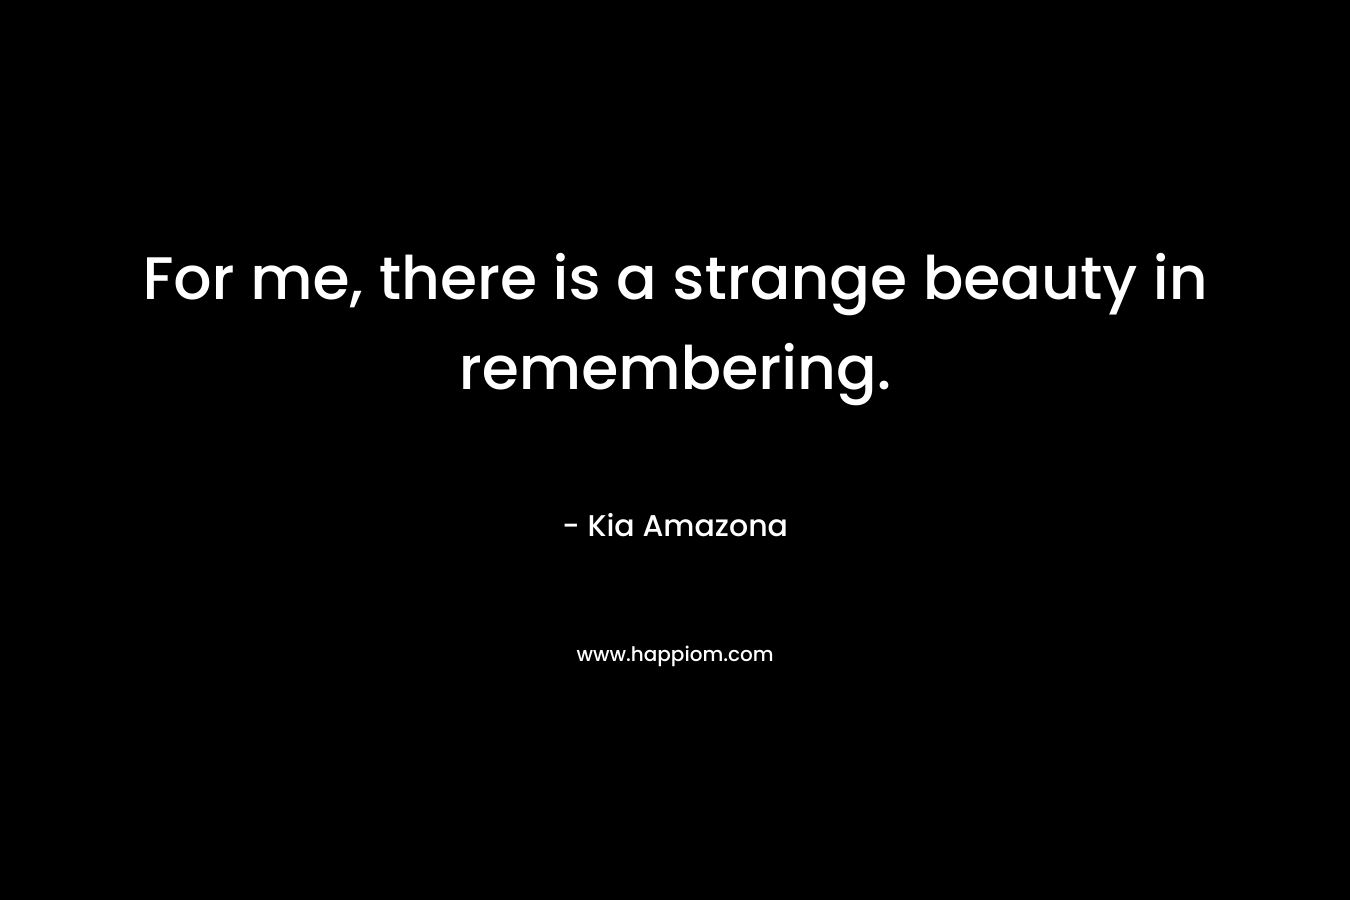 For me, there is a strange beauty in remembering. – Kia Amazona